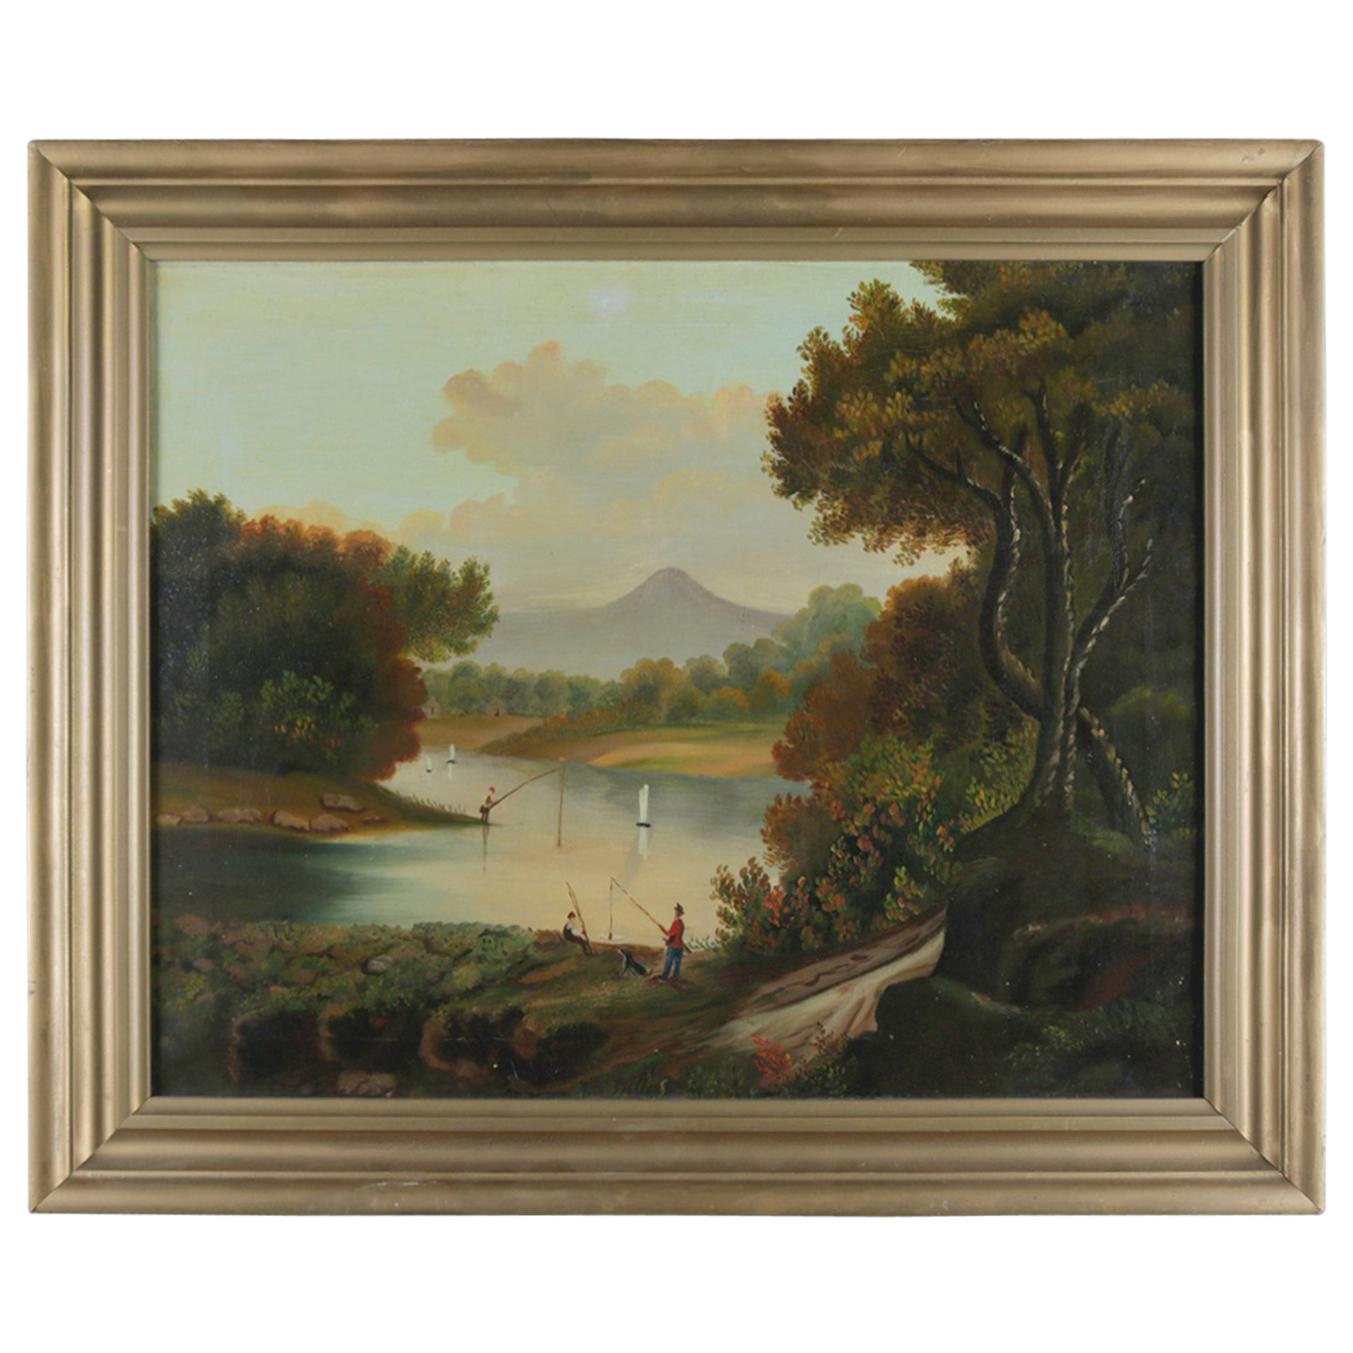 Antique Thomas Chambers School Oil on Canvas Landscape with Figures, circa 1890